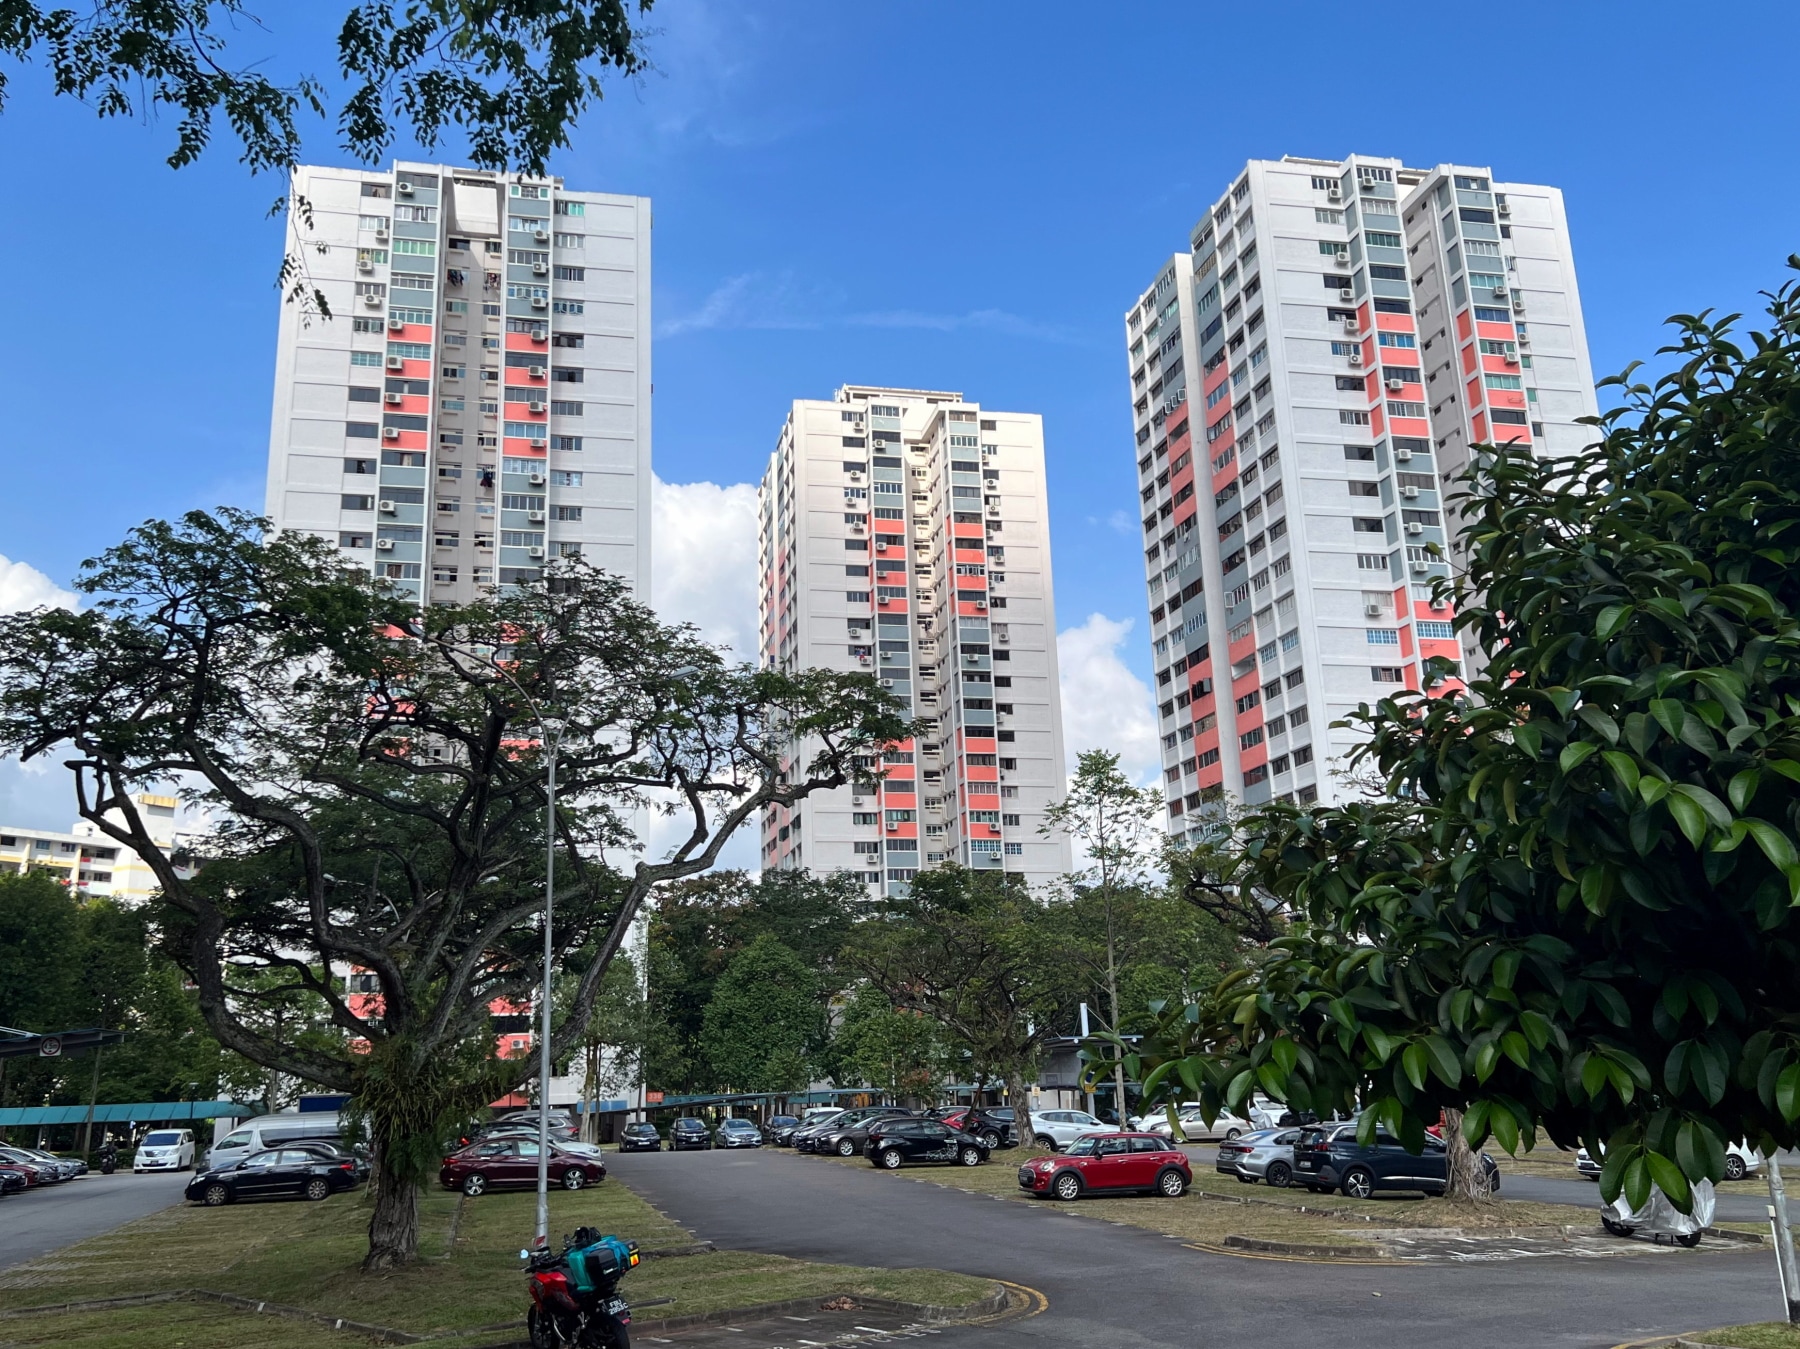 Clementi Old and New: Casa Clementi, West Coast Court, Clementi Shine, and Pei Tong Primary